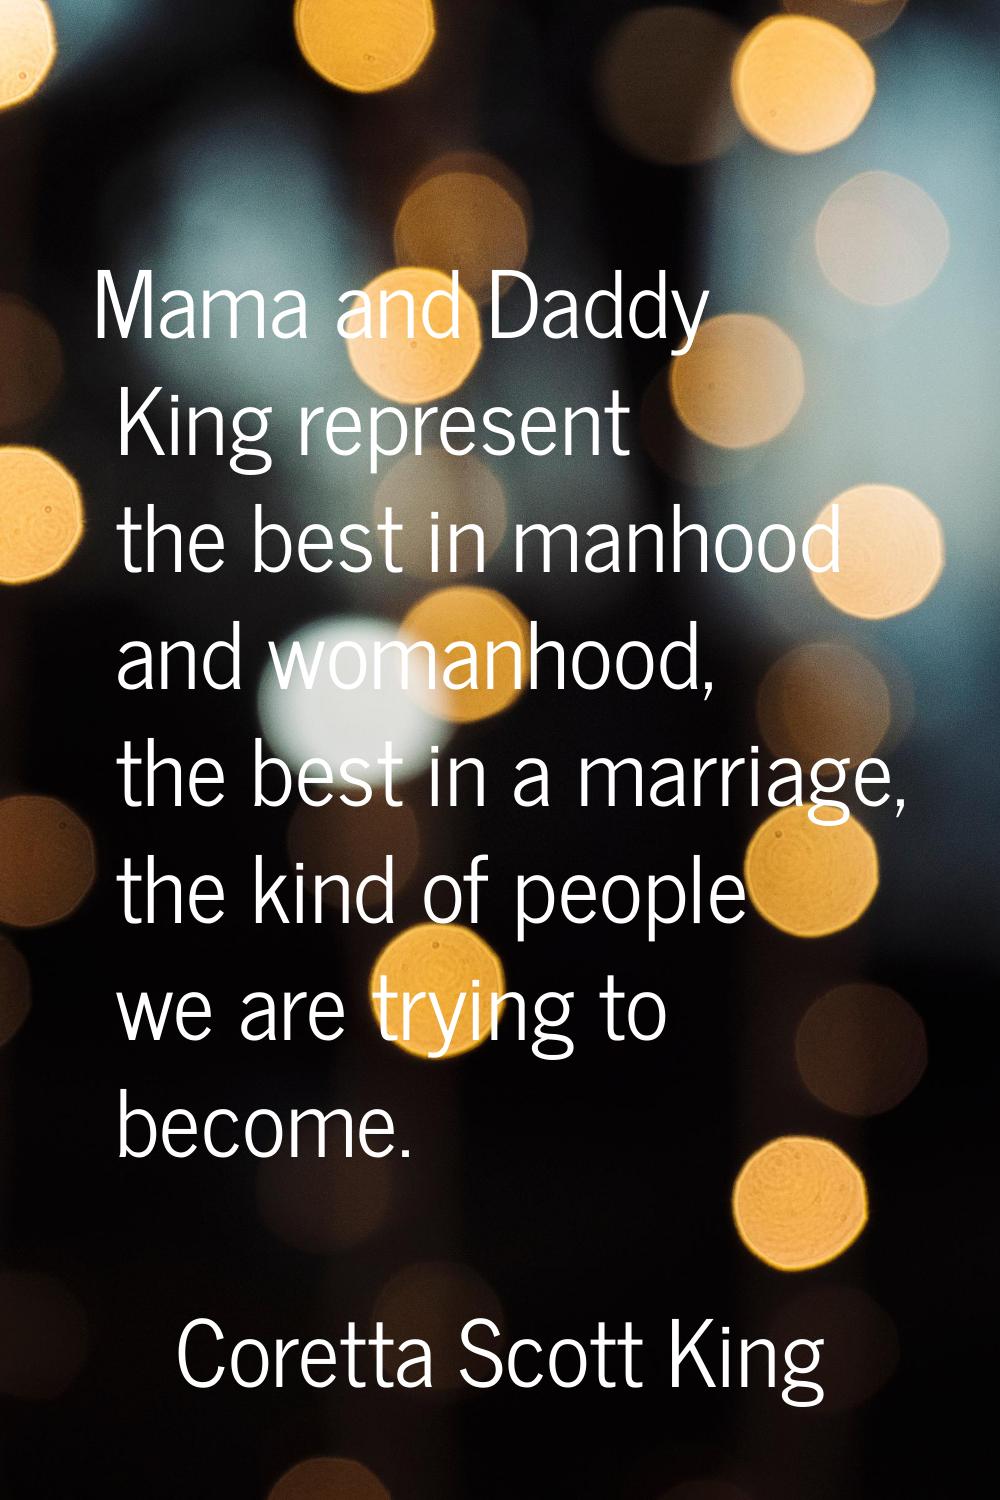 Mama and Daddy King represent the best in manhood and womanhood, the best in a marriage, the kind o